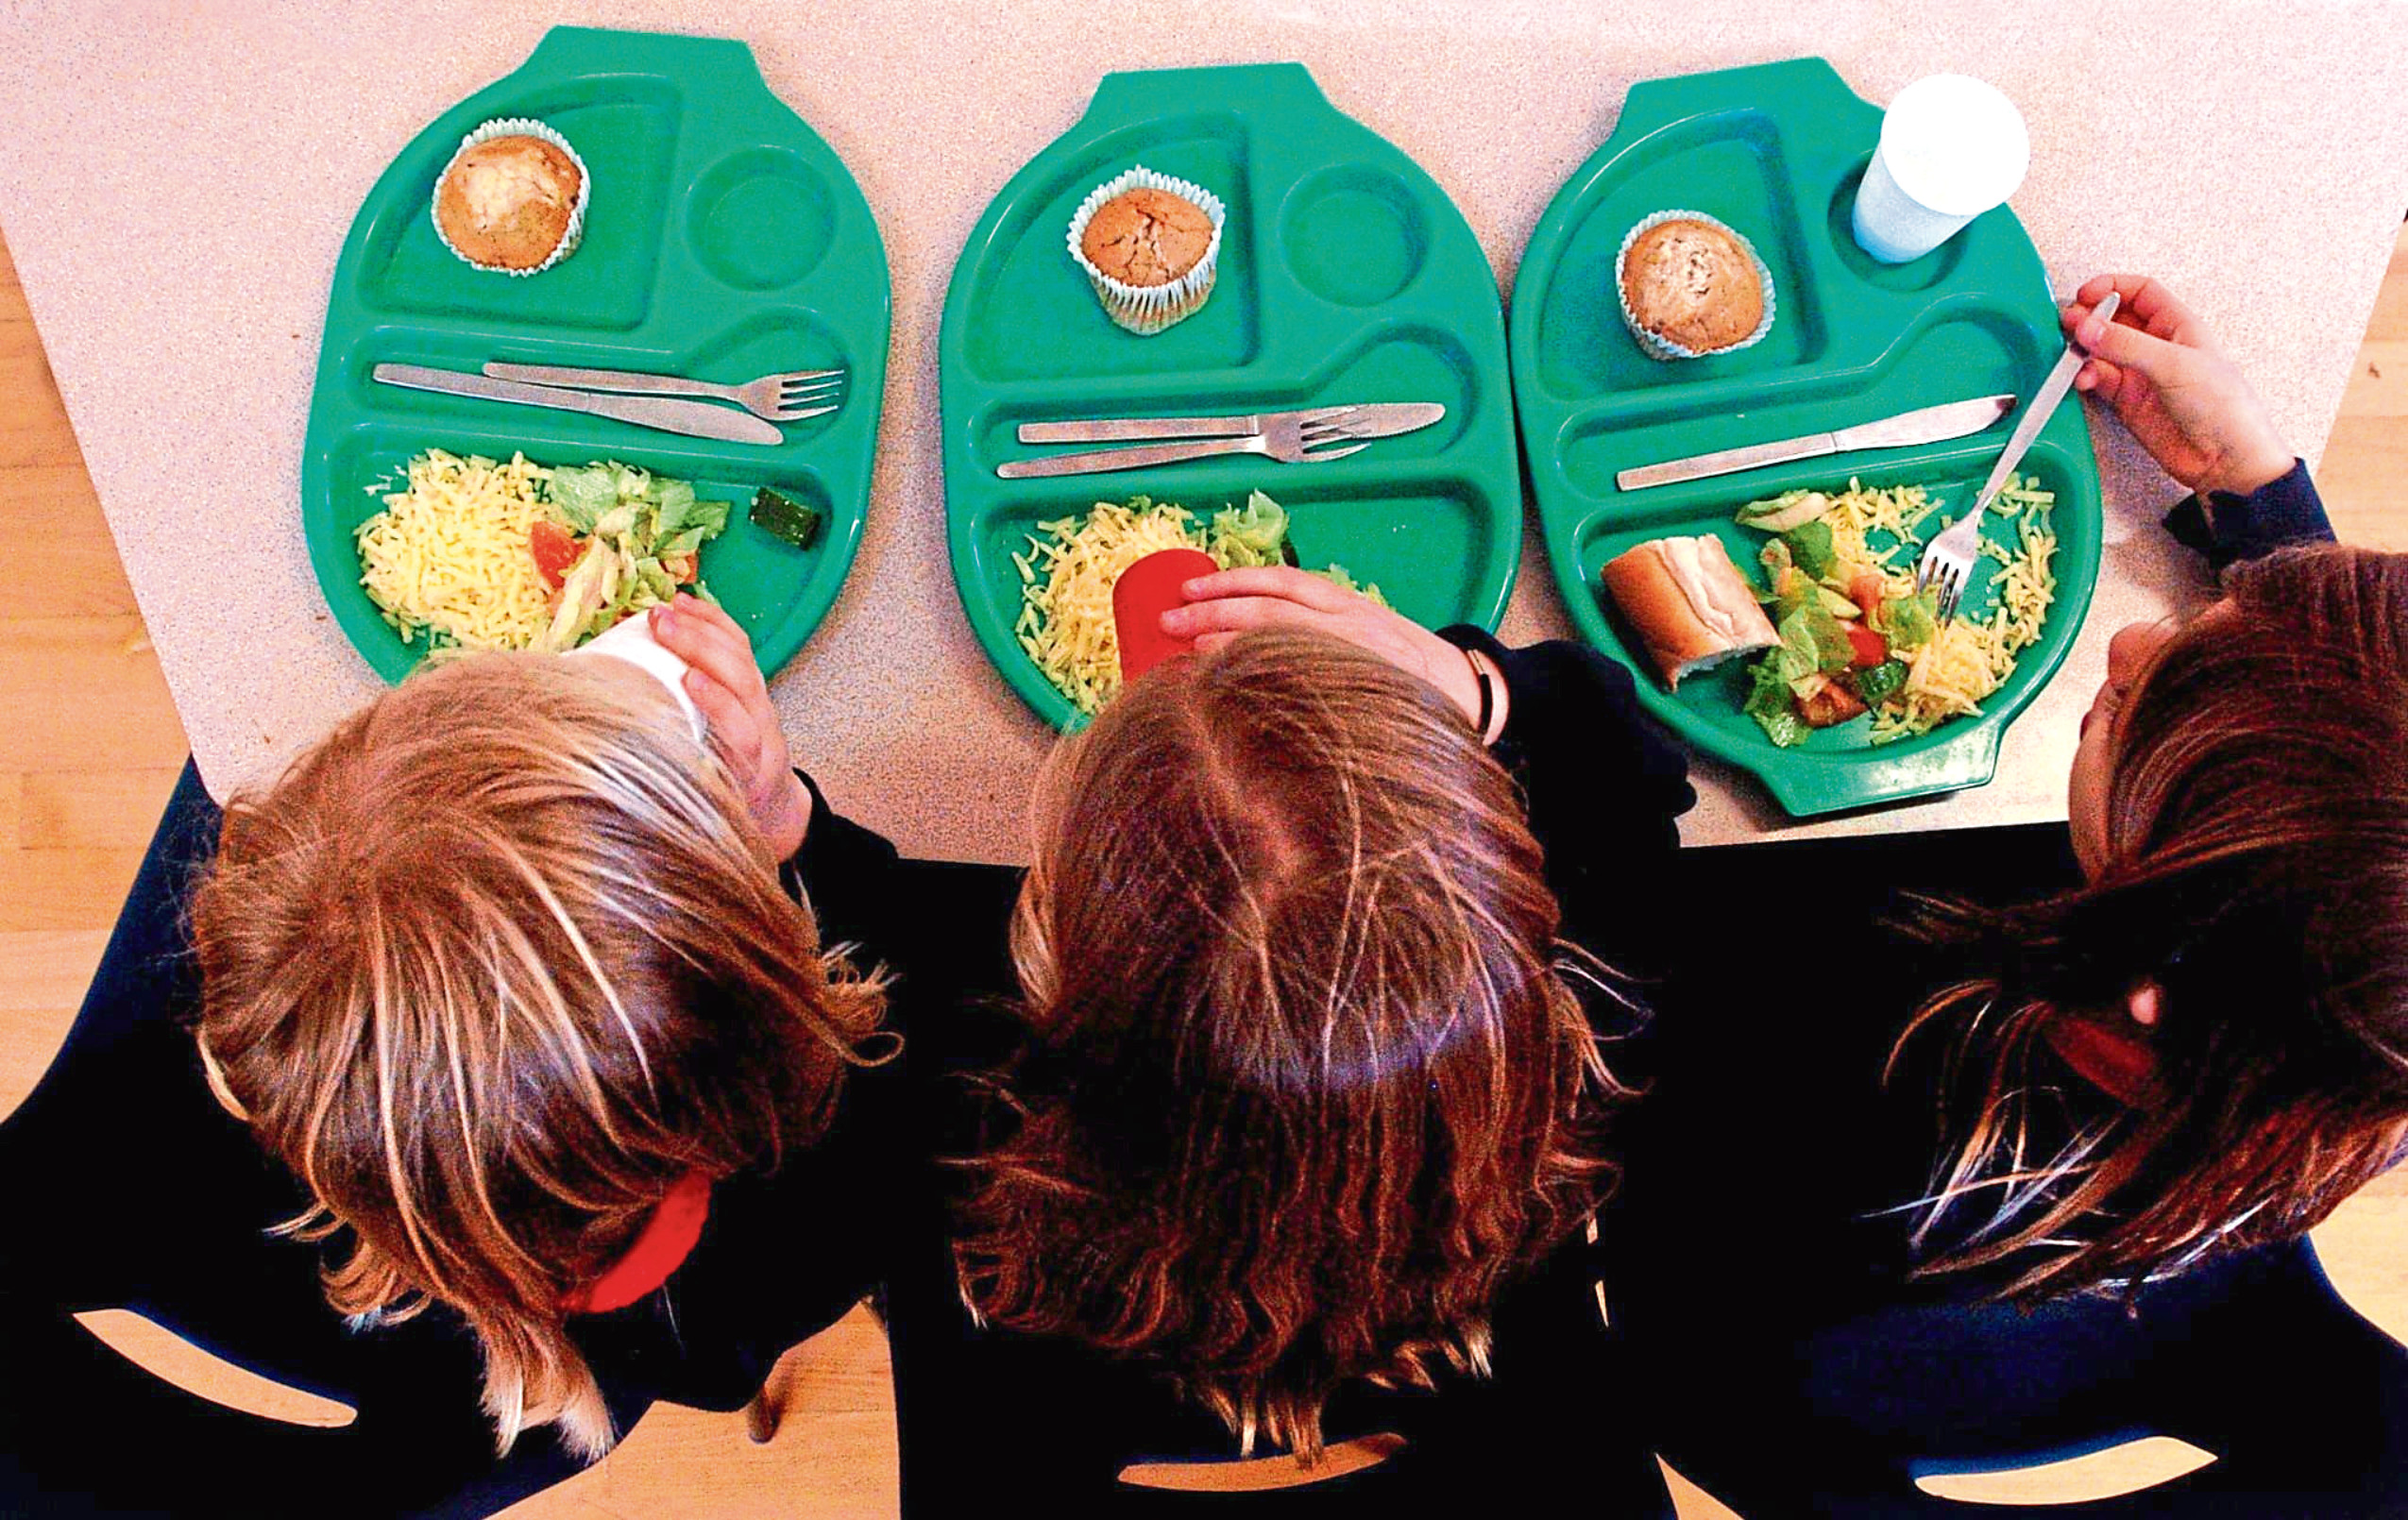 Free school meals in Scotland. When will be become universal?